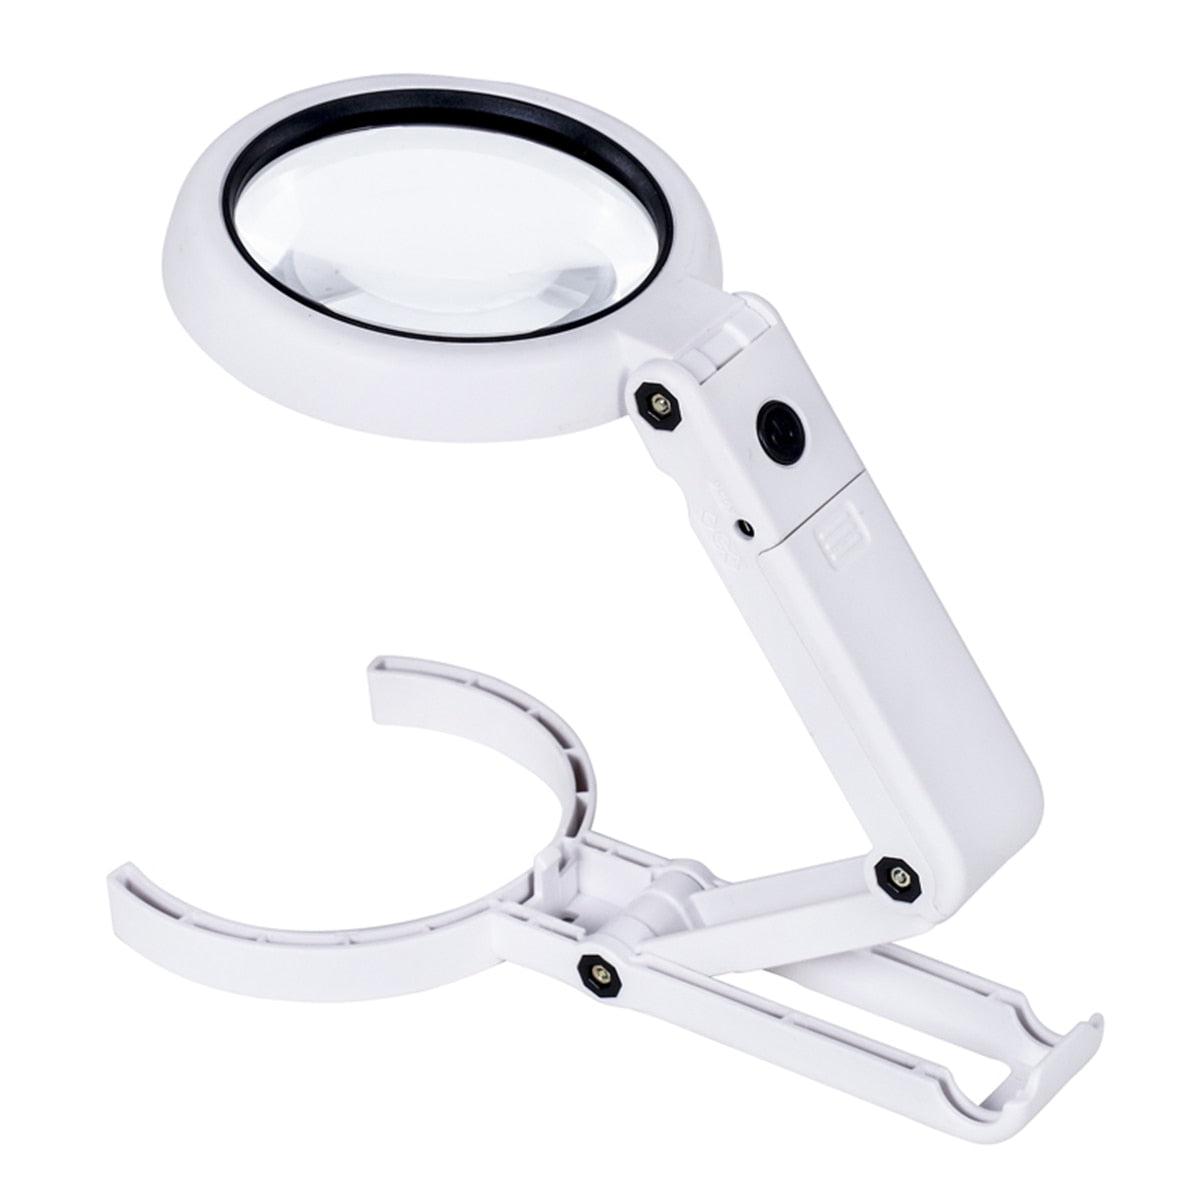 Lampe LED avec loupe grossissante - Couture